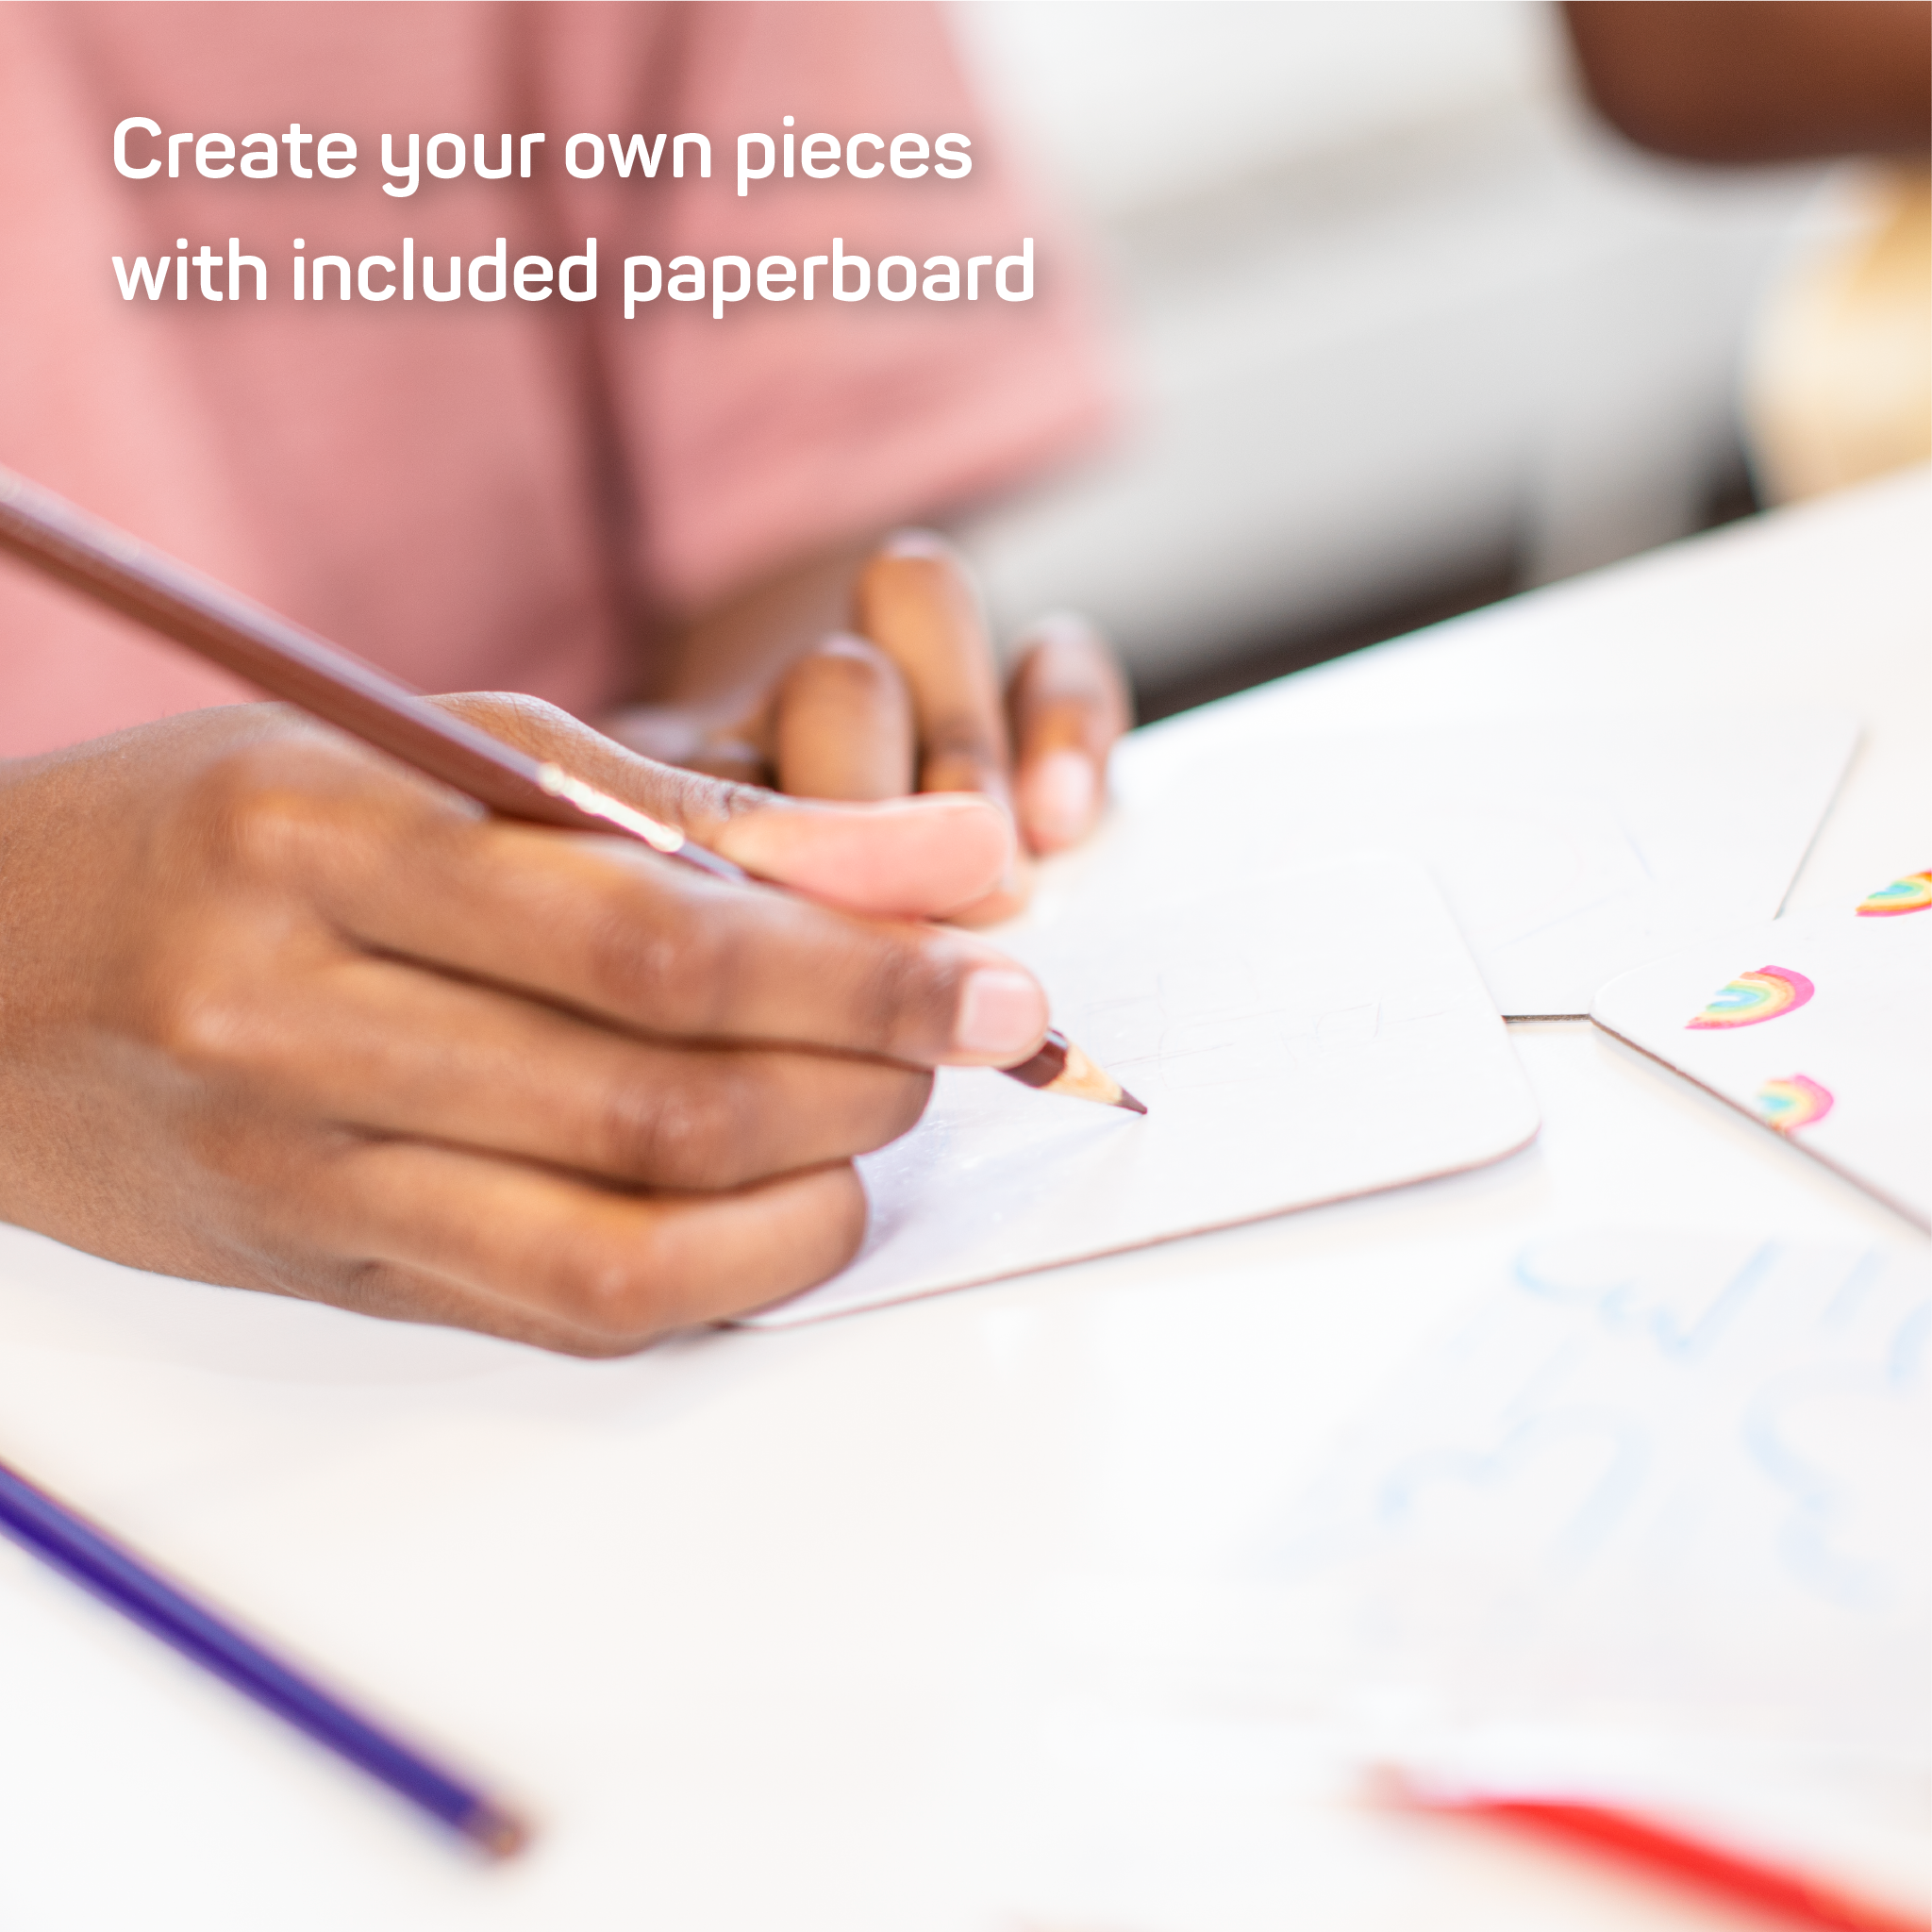 Kid drawing on paperboard panel with text that says "Create your own pieces with included paperboard"